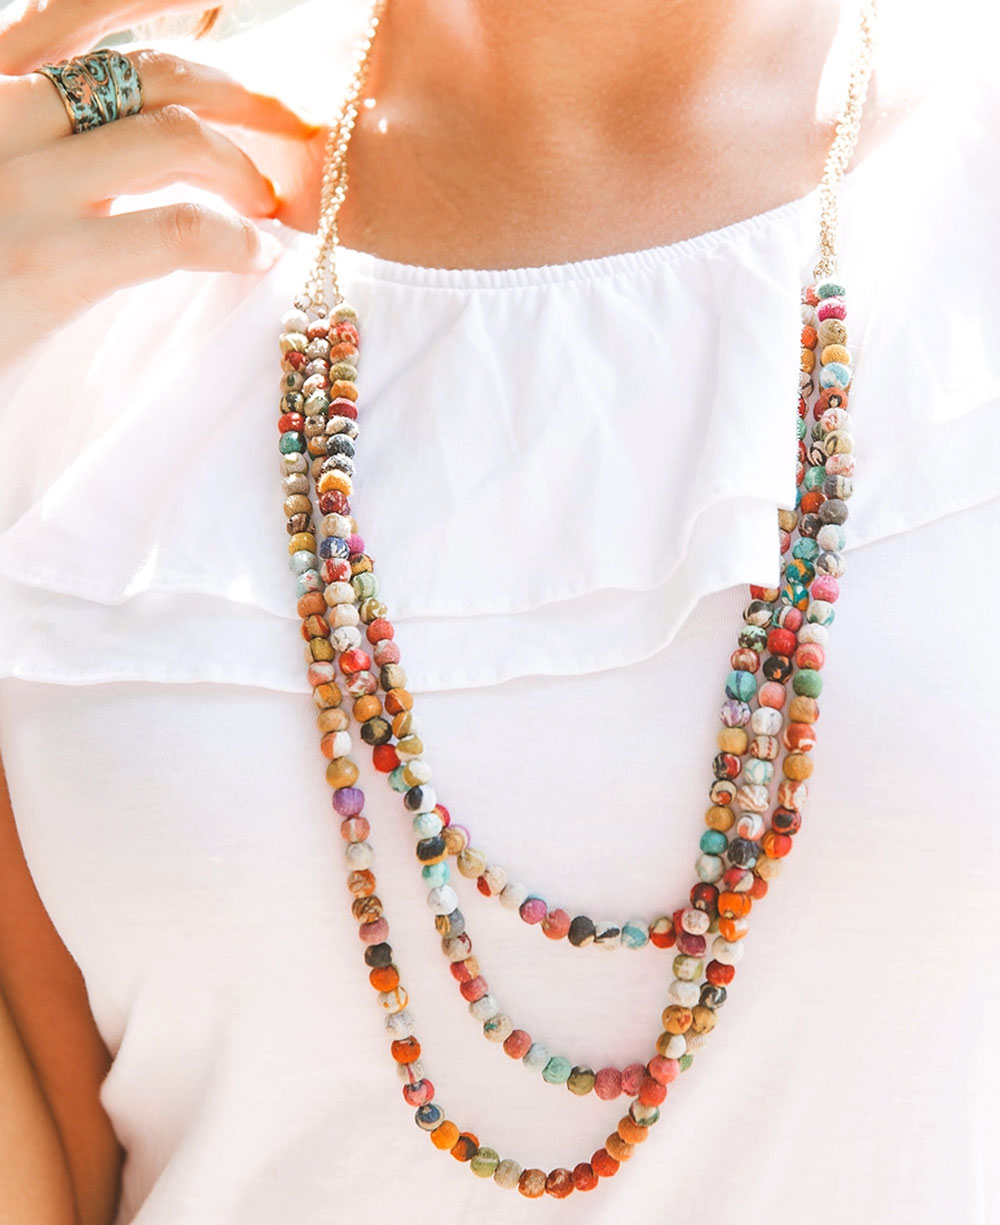 Sustainable wooden bead necklace from India